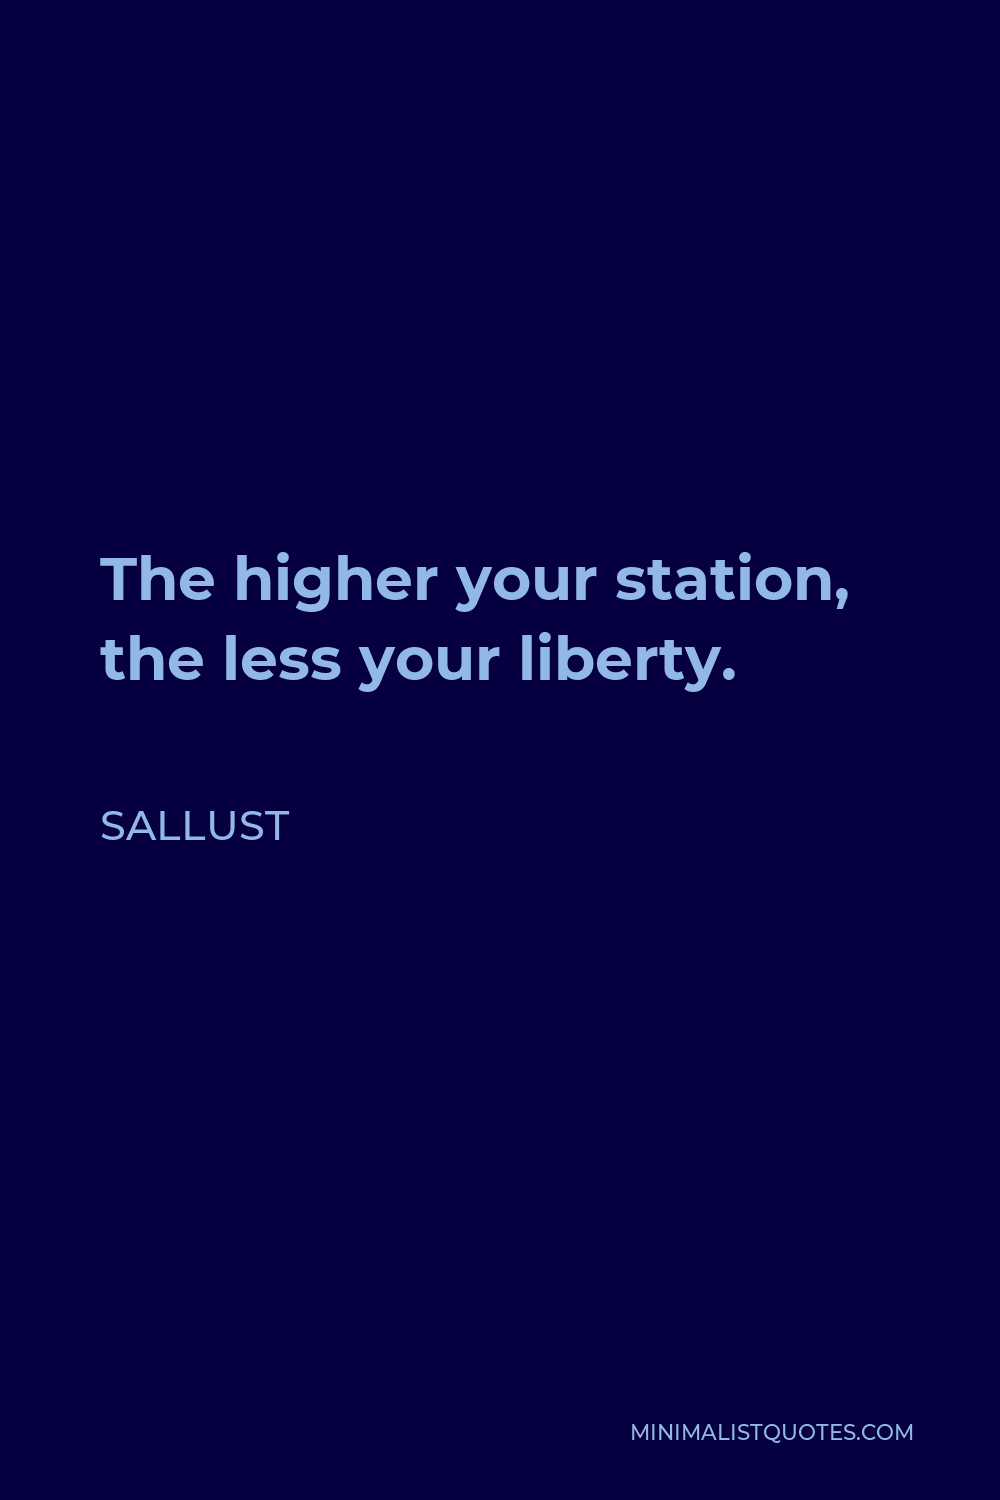 Sallust Quote - The higher your station, the less your liberty.